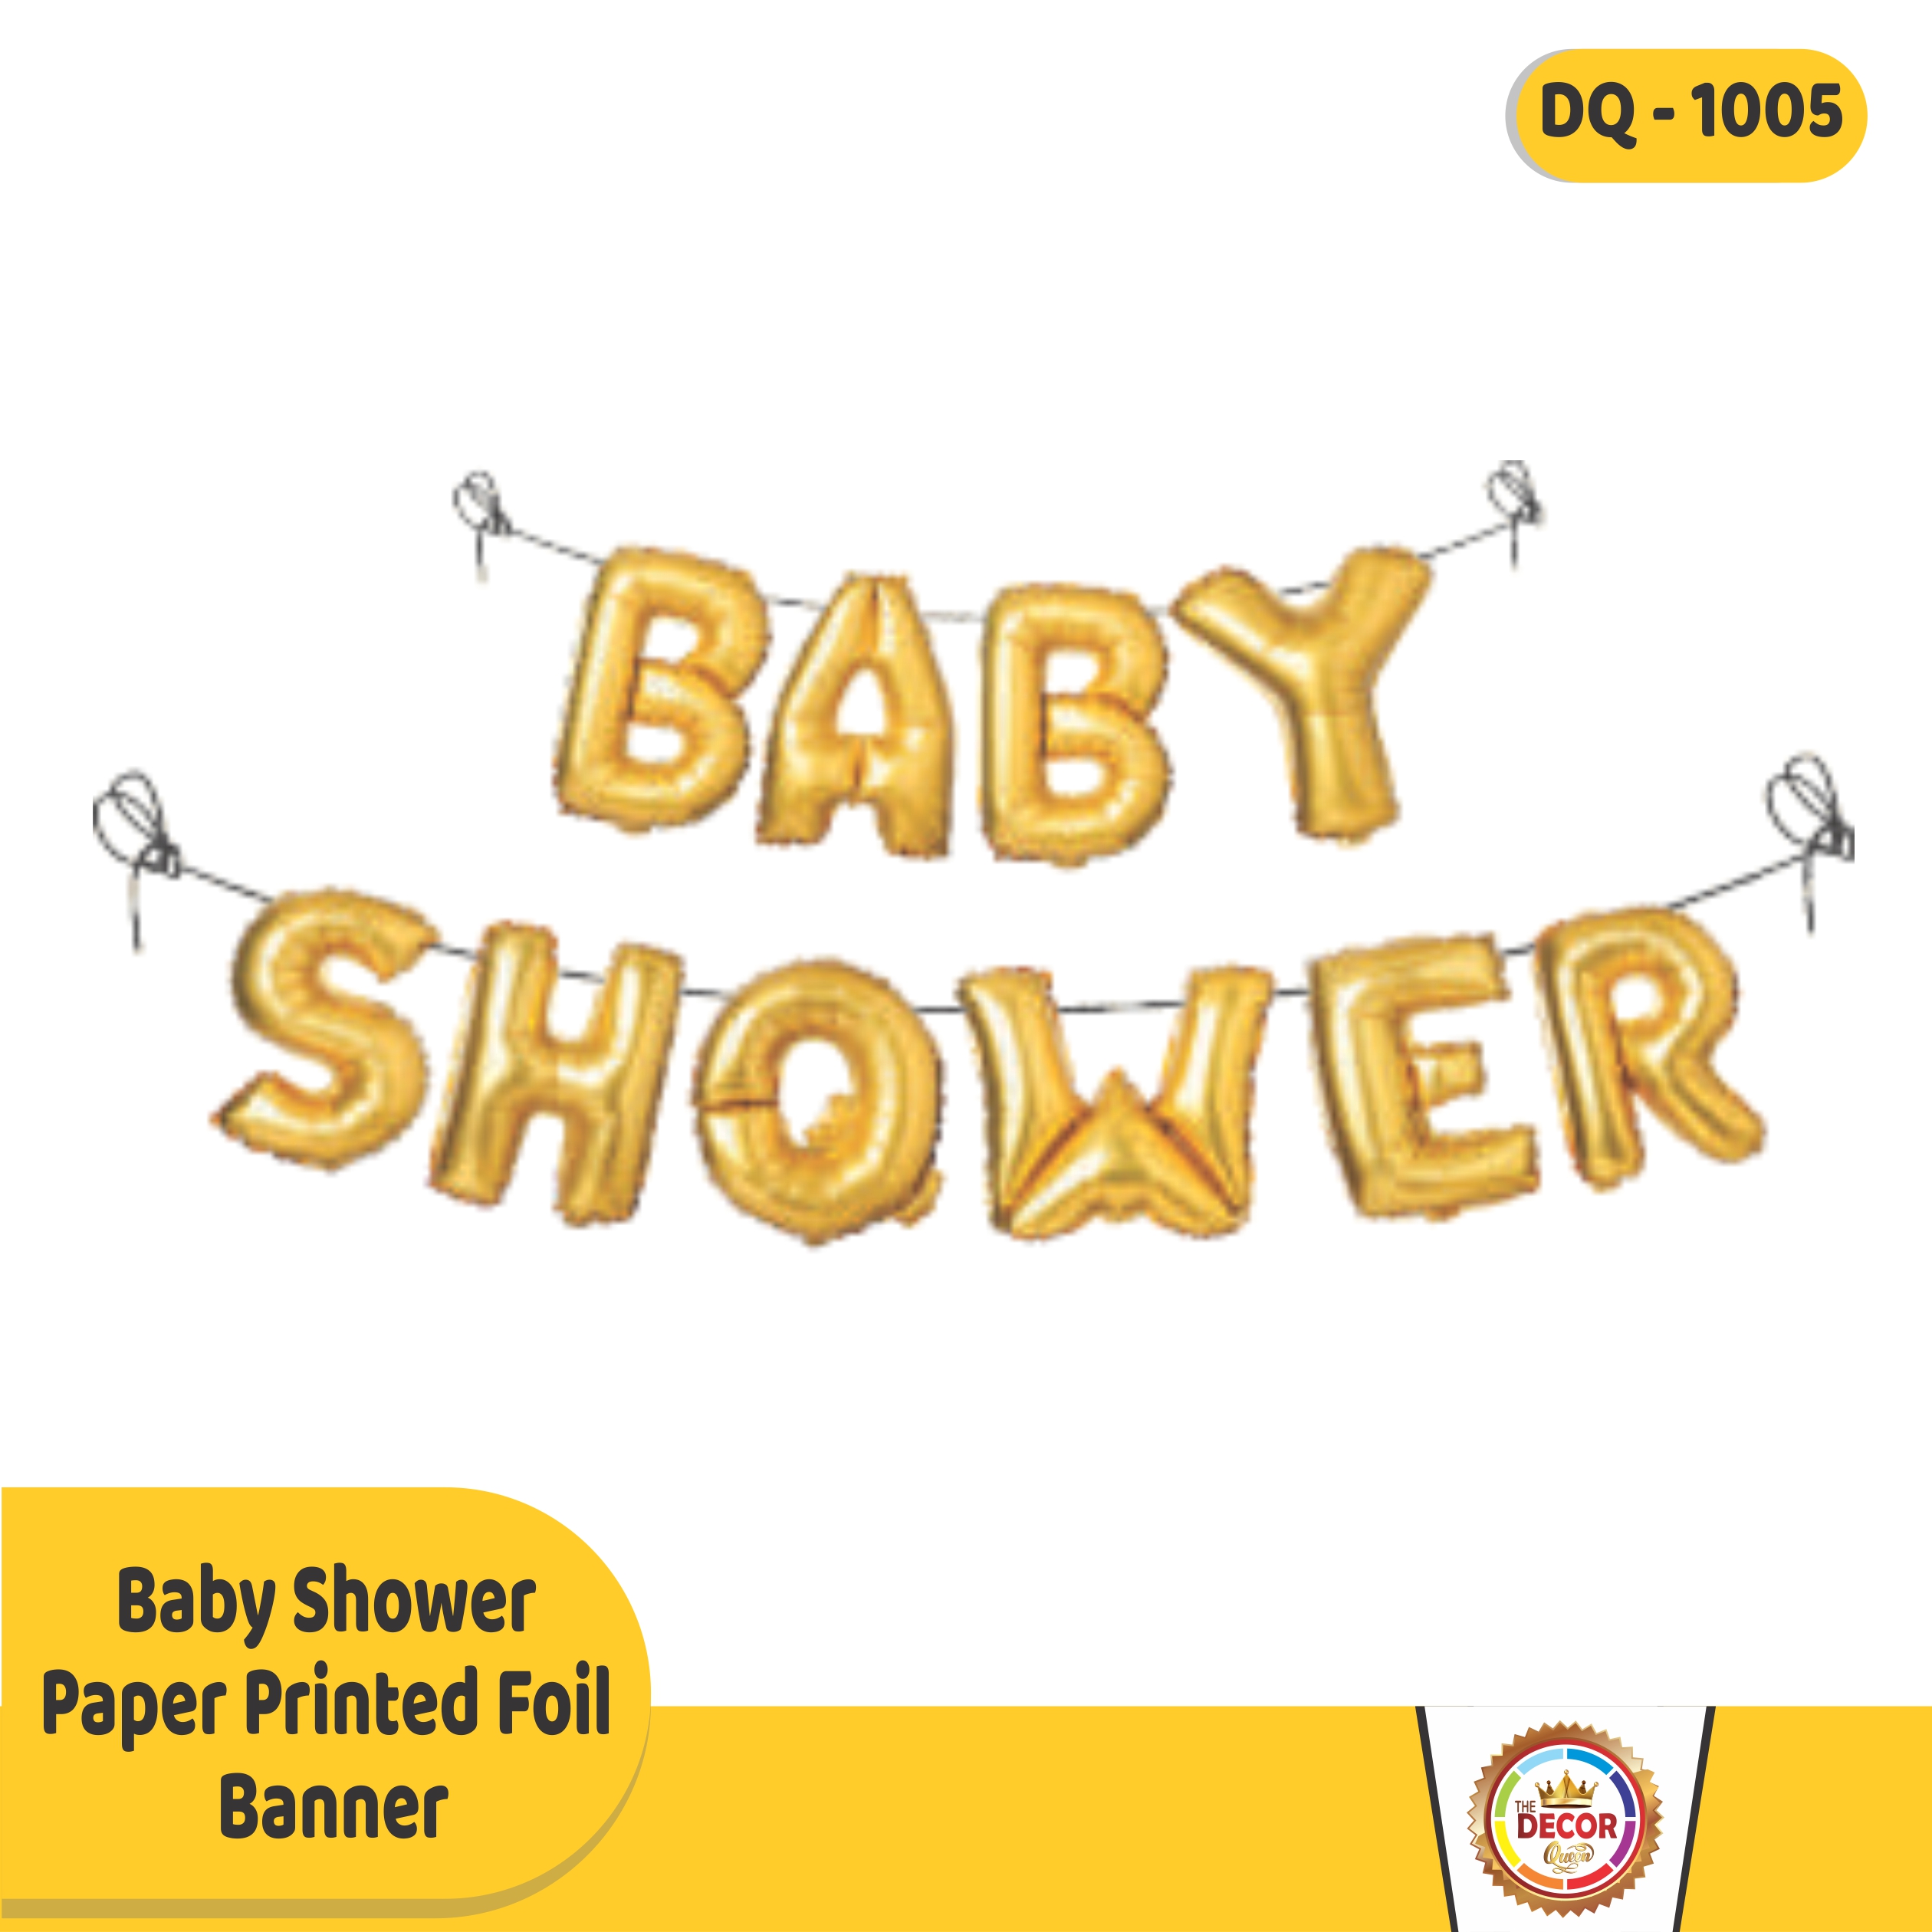 Baby Shower Paper Printed Foil  Banner|Banners|Baby Shower Banner